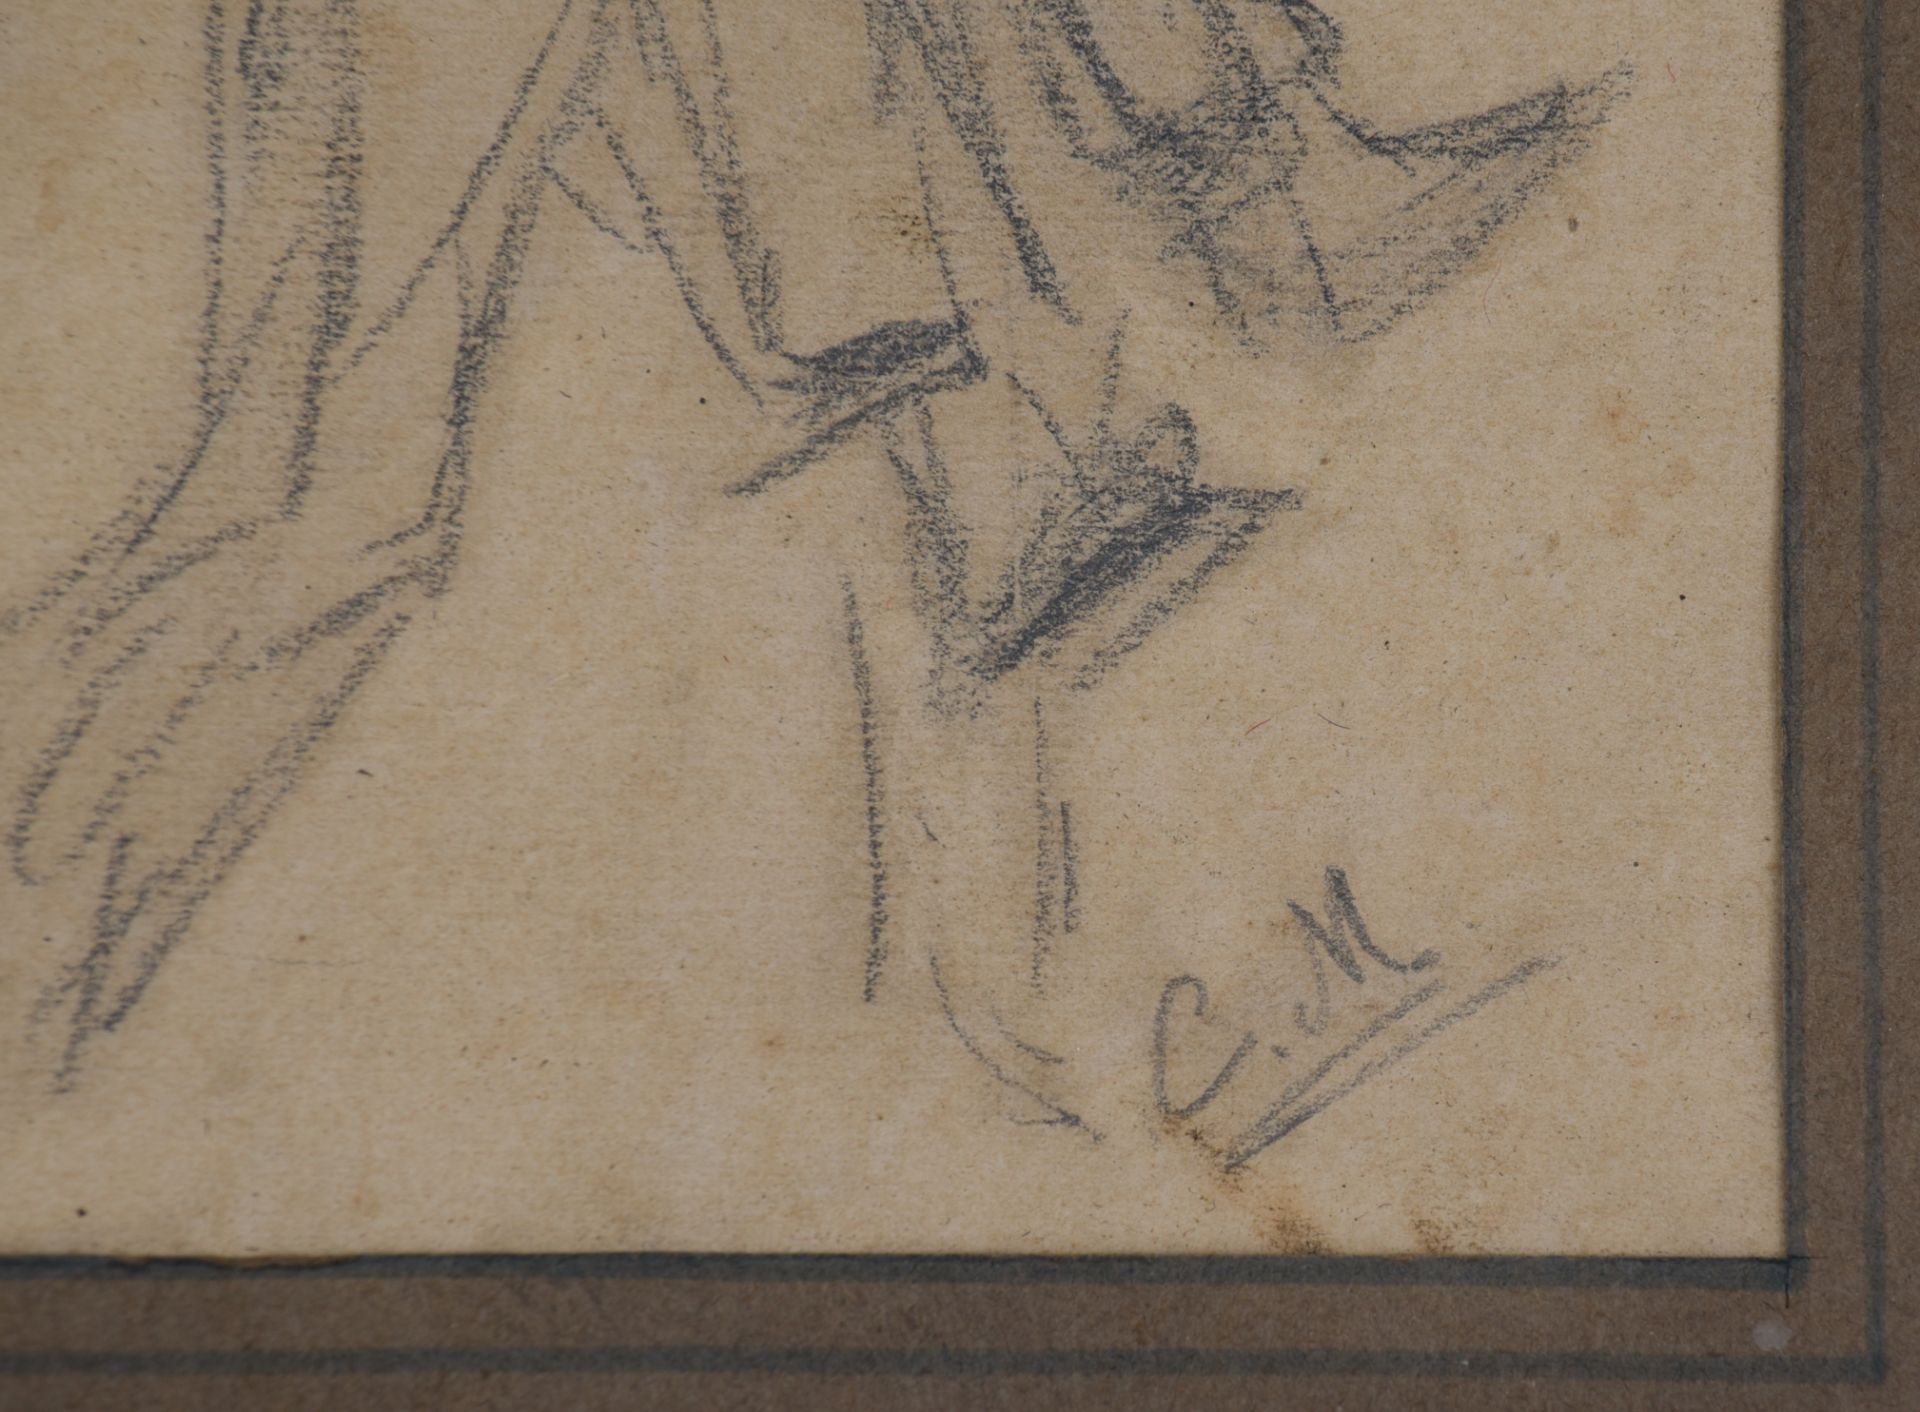 (T) Constantin Meunier (1831-1905), study drawing, charcoal on paper, 11 x 19 cm - Image 5 of 12